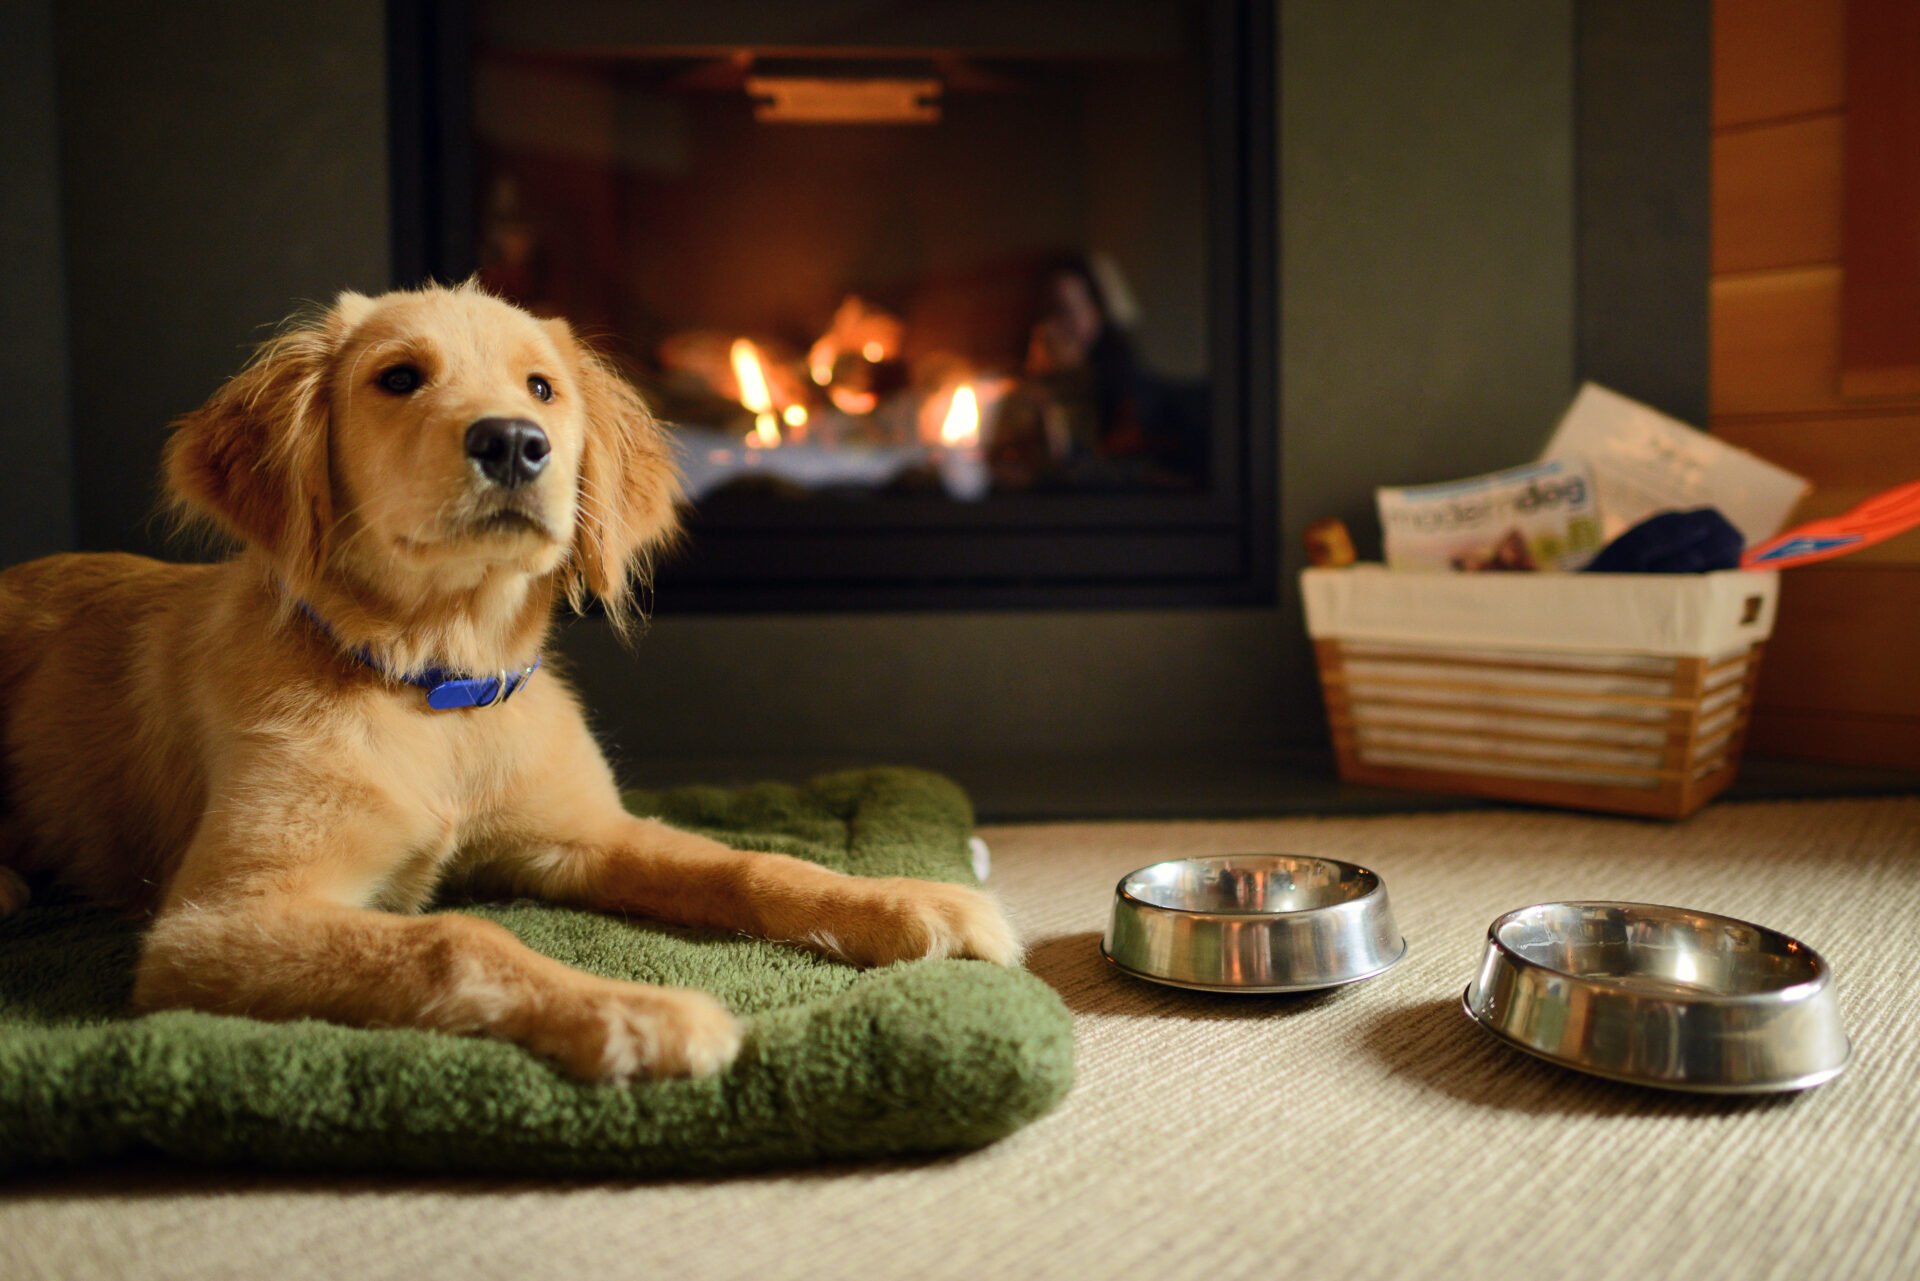 a cute golden retriever puppy looks at the camera while lying in front of the fireplace in one of the rooms at the wickanninish inn, the best storm watching hotel in tofino